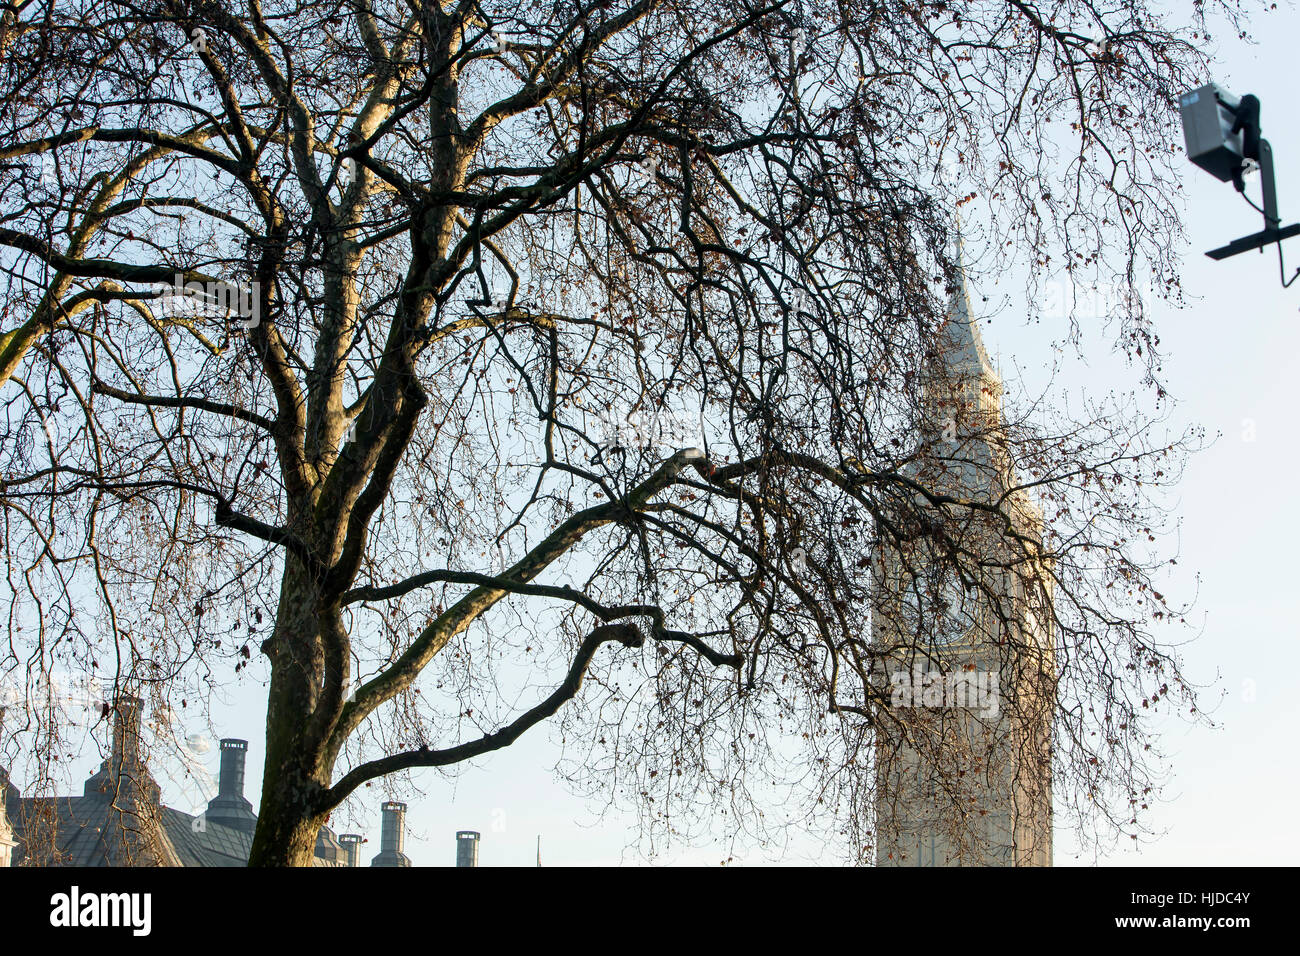 The Supreme Court of the Land. The Supreme Court was asked to decide a landmark decision about the triggering of Article 50. Supreme Court is across Parliament Square from the houses of Parliament. Credit: Jane Campbell/Alamy Live News Stock Photo